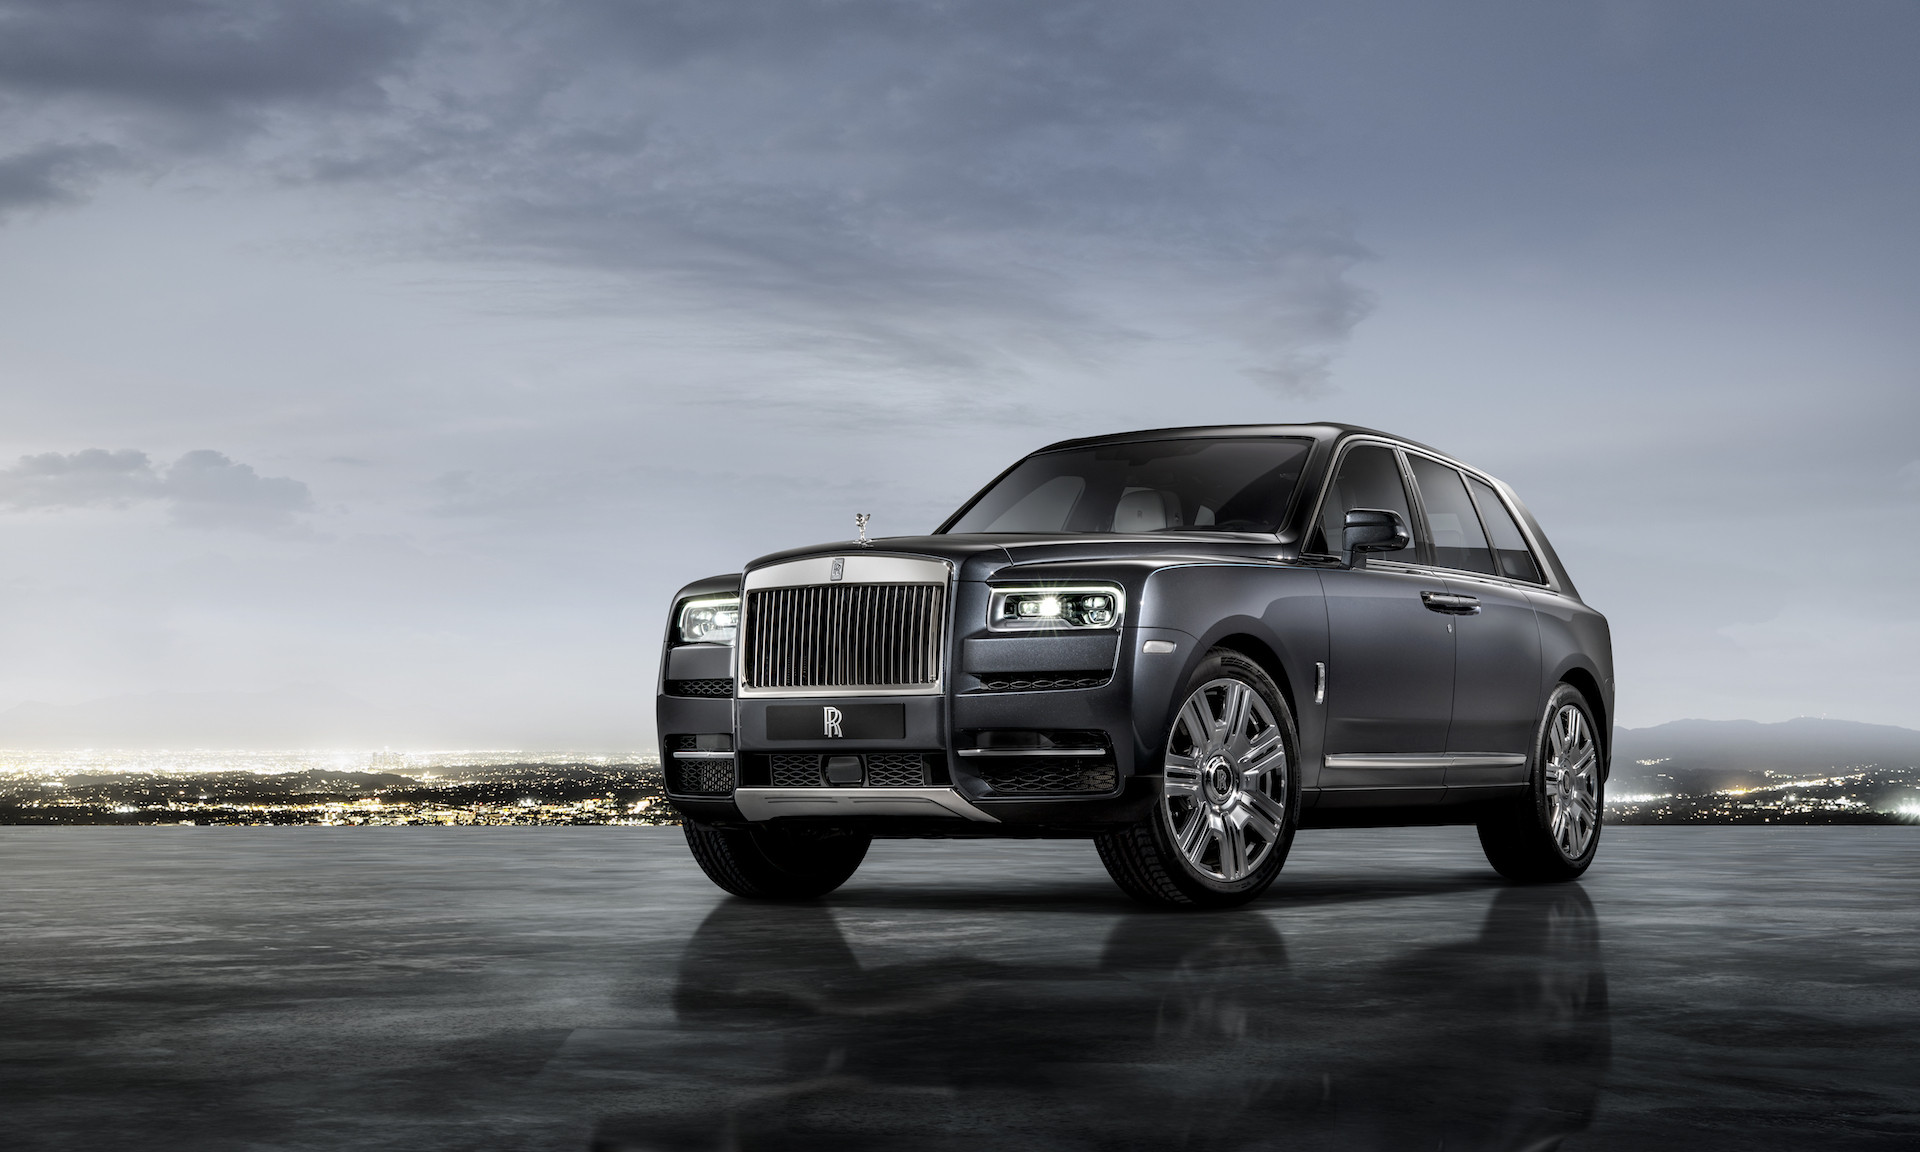 Build your own Rolls Royce  as long as money is no object